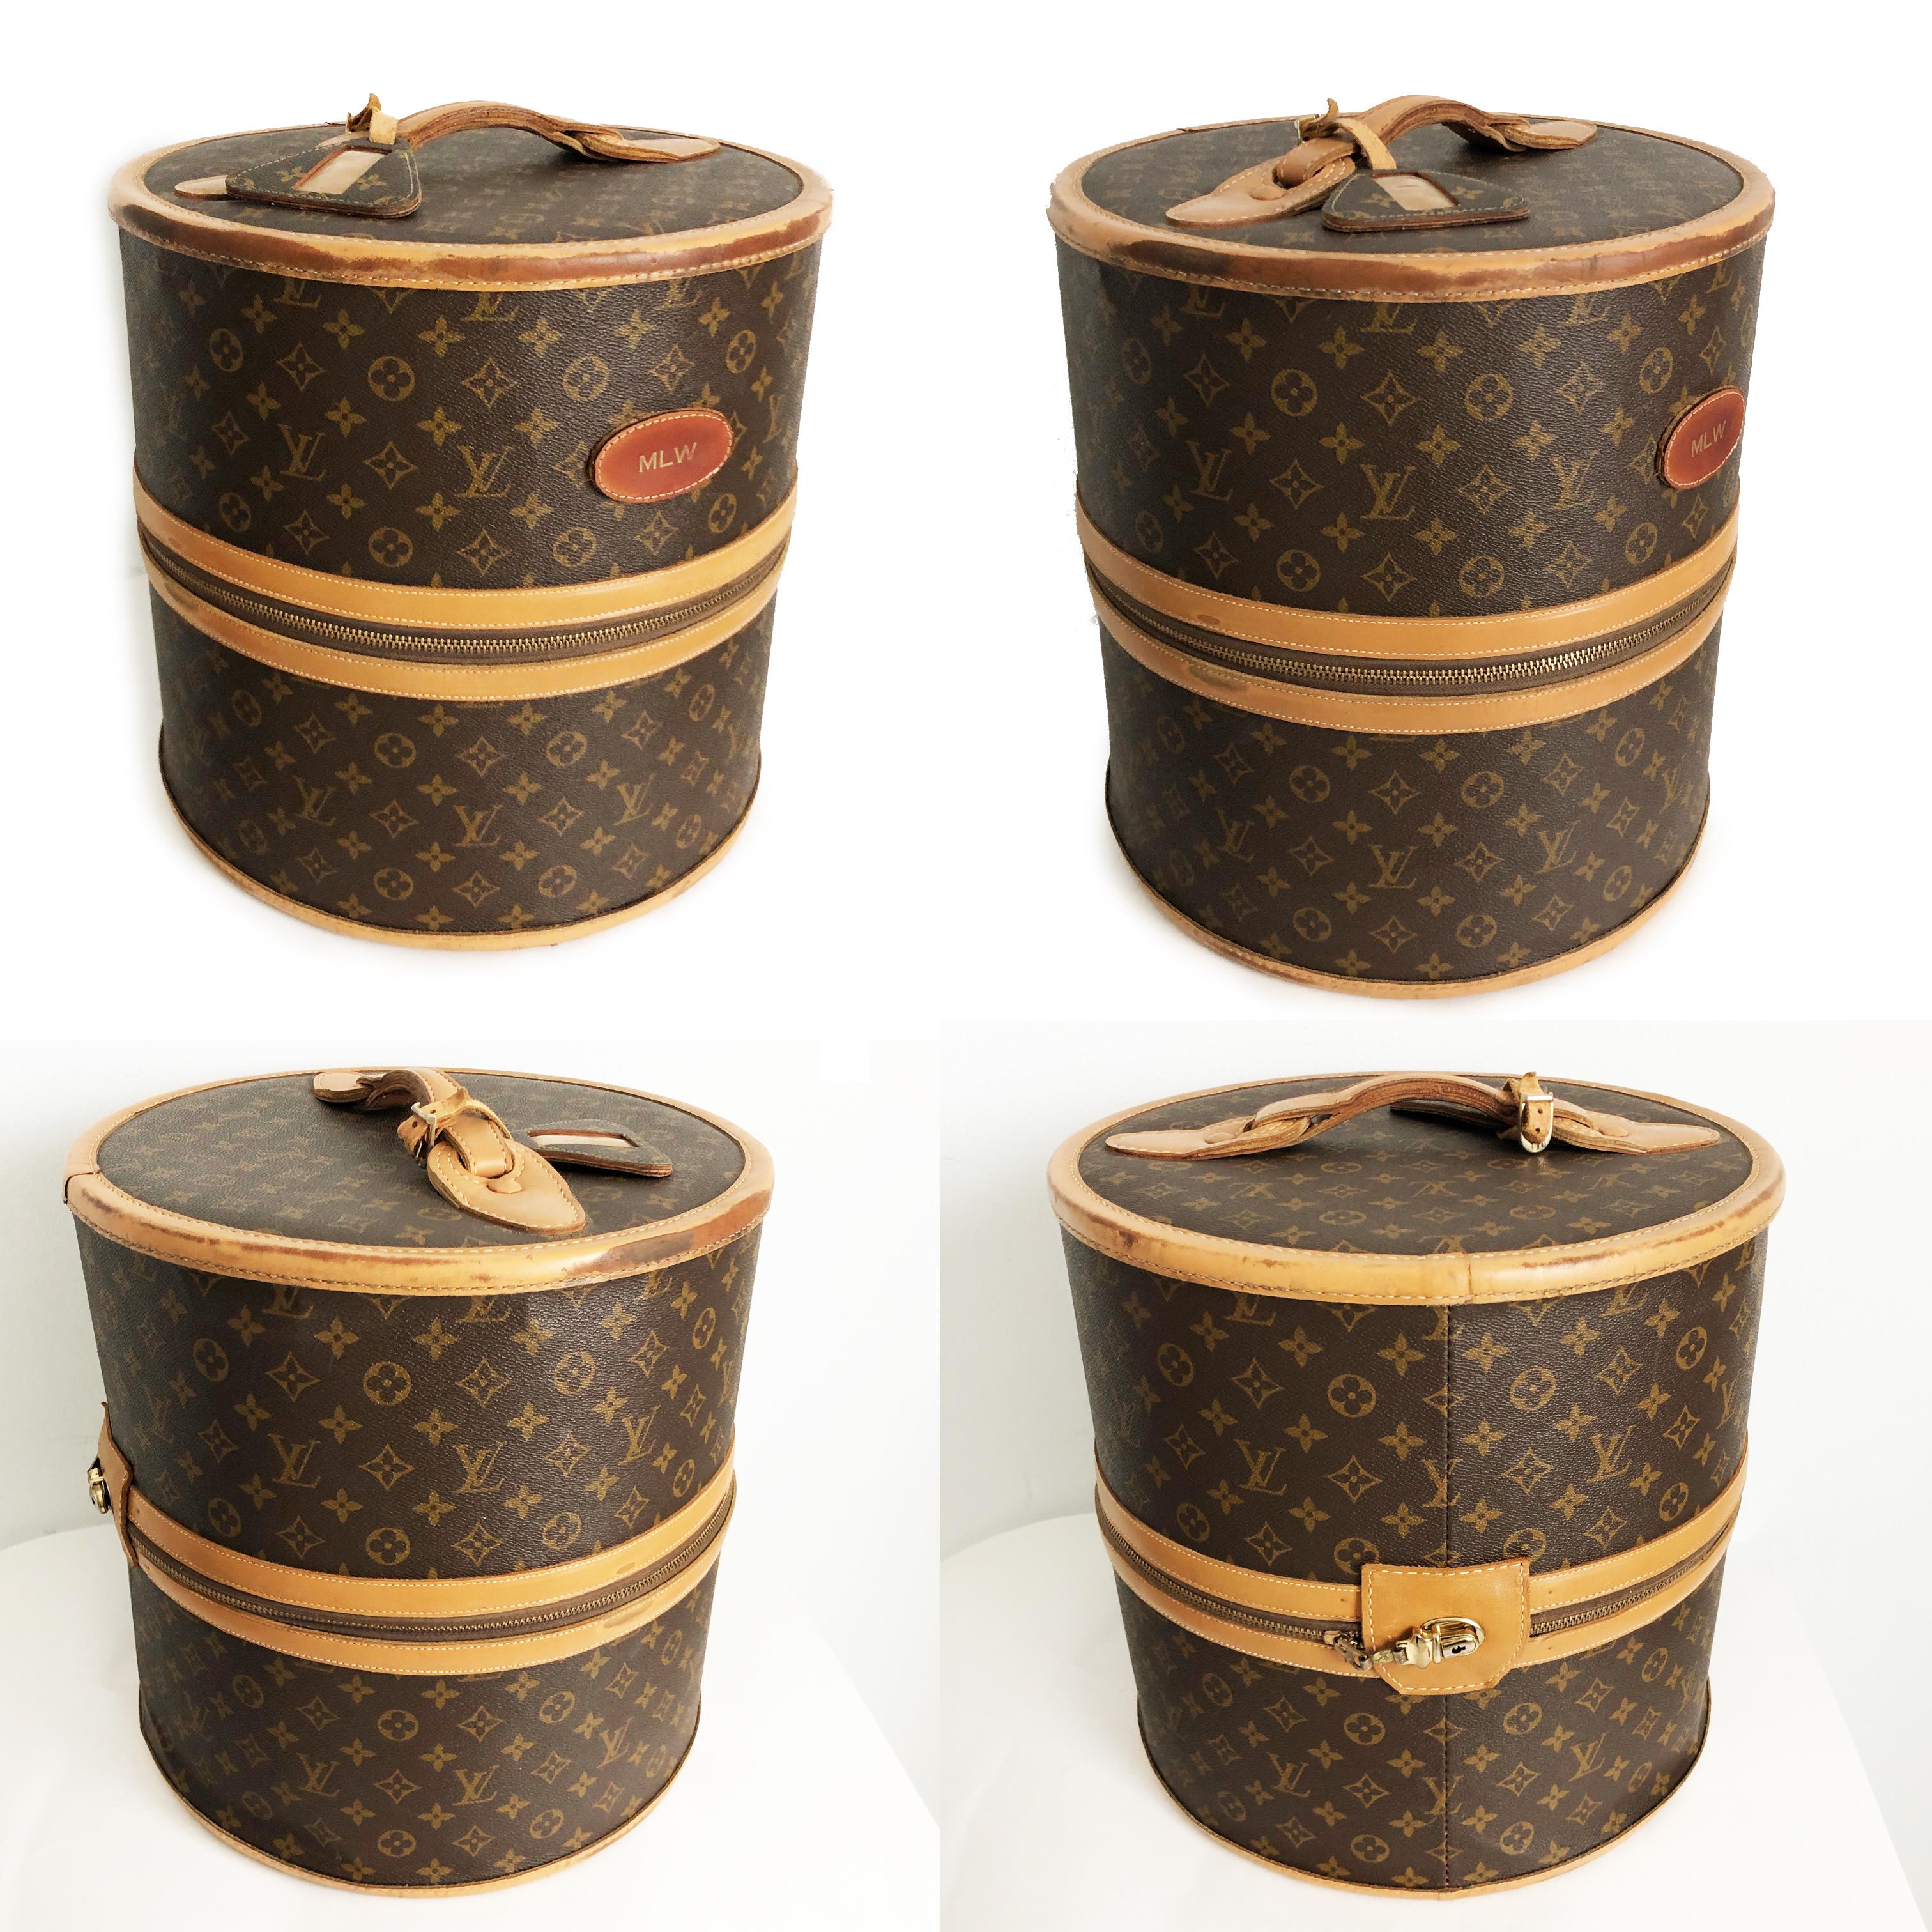 Extremely rare Louis Vuitton x The French Luggage Company Wig Case or Round Hat Trunk, likely made in the 70s.  Made from Louis Vuitton's signature monogram canvas and created in the USA under special license by The French Luggage Company, this